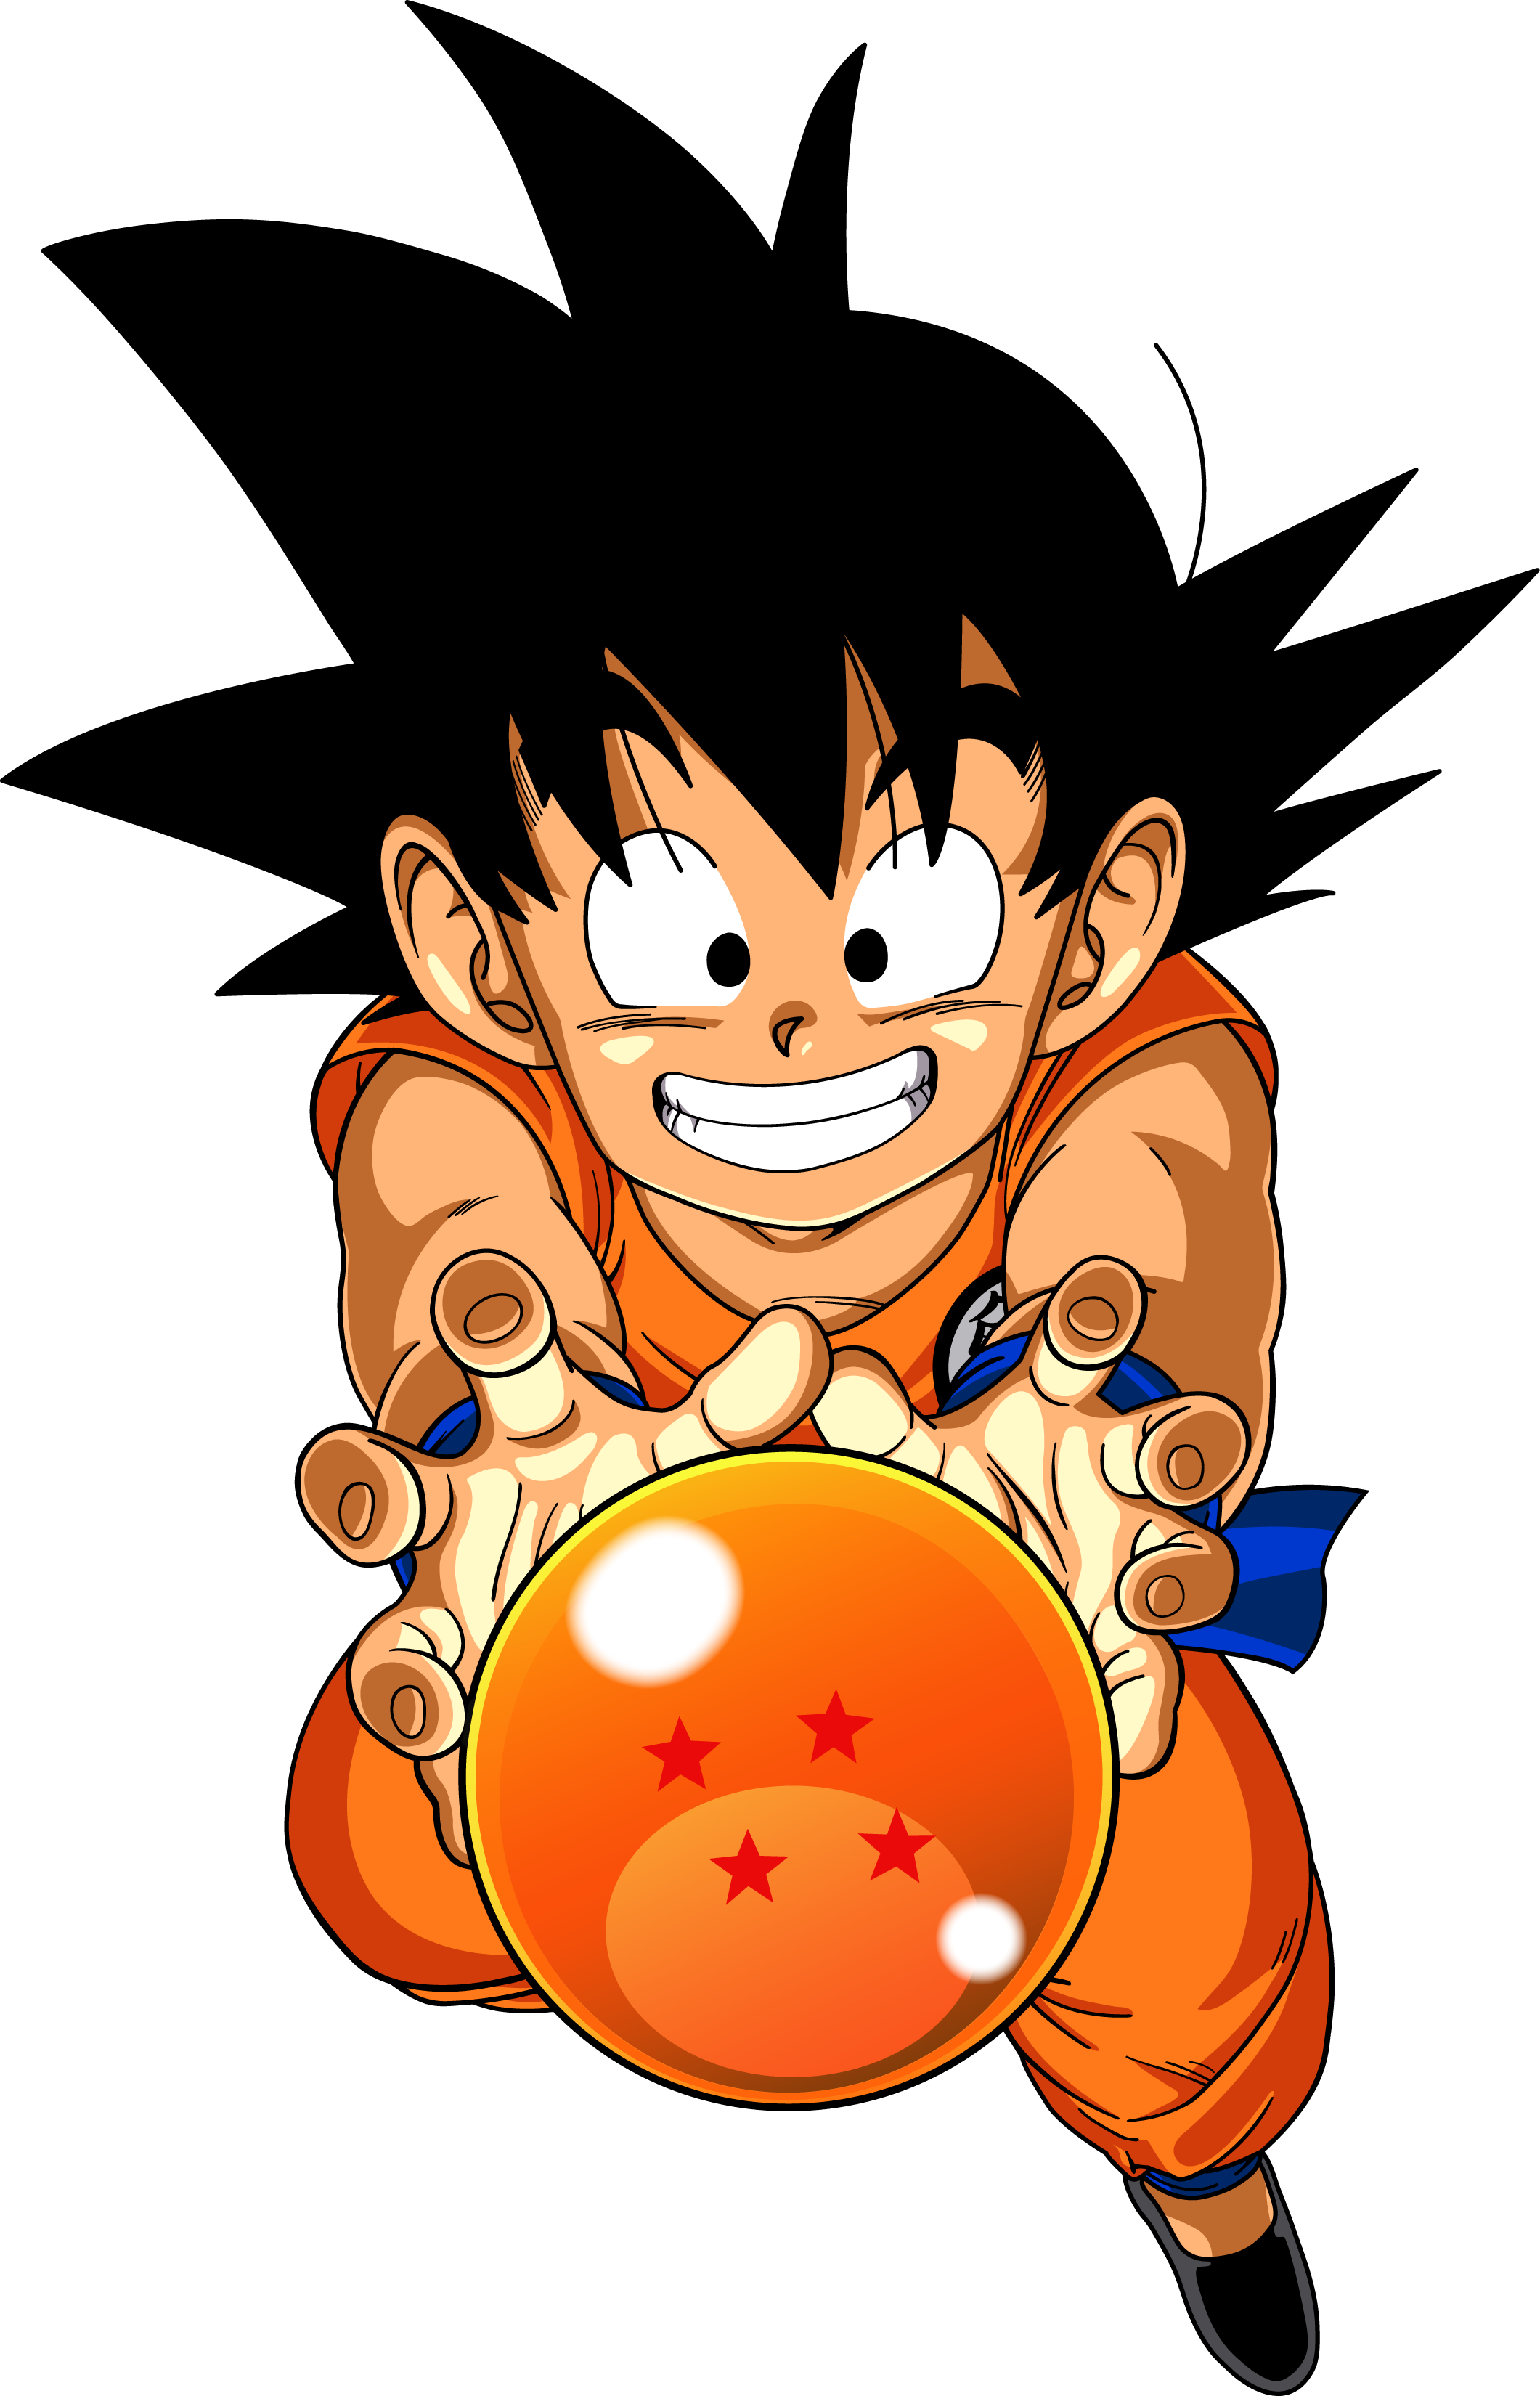 Dragon-ball-super-png by sant